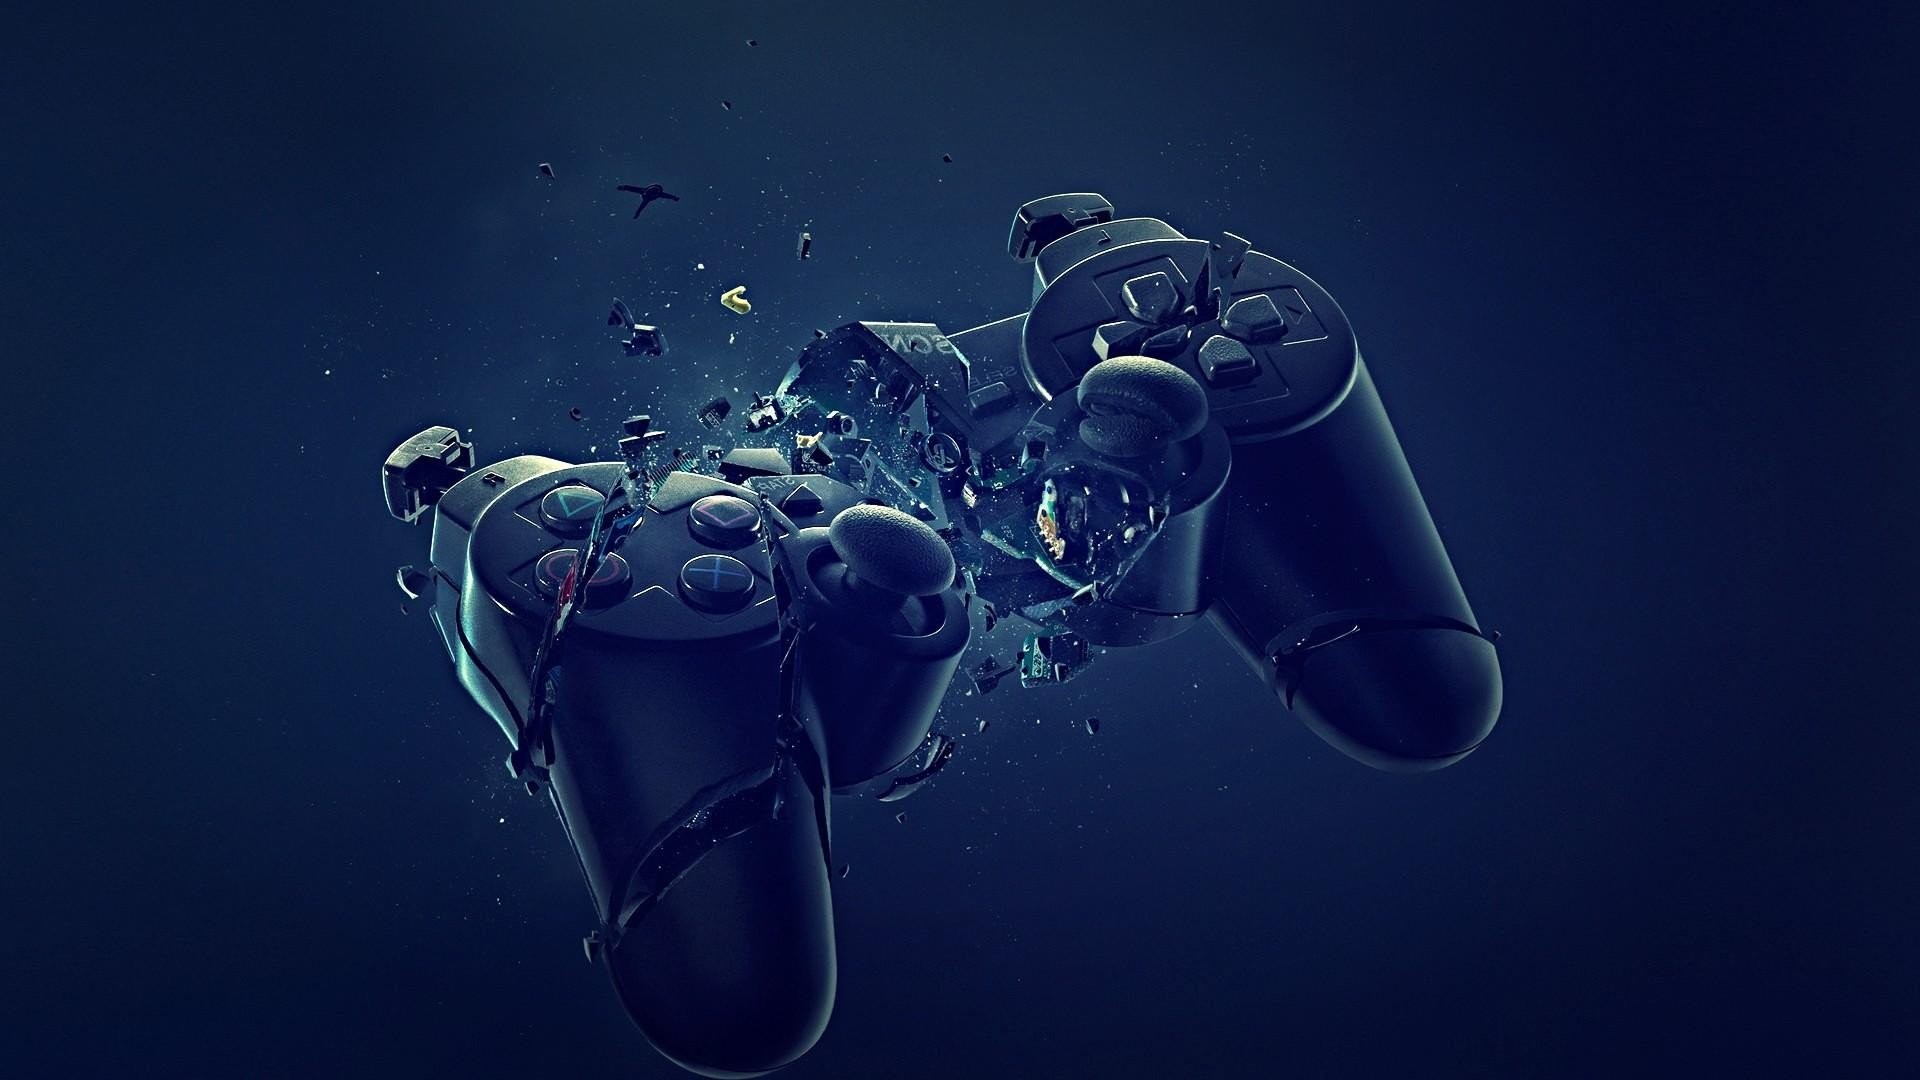 playstation wallpaper,water,underwater,game controller,organism,technology